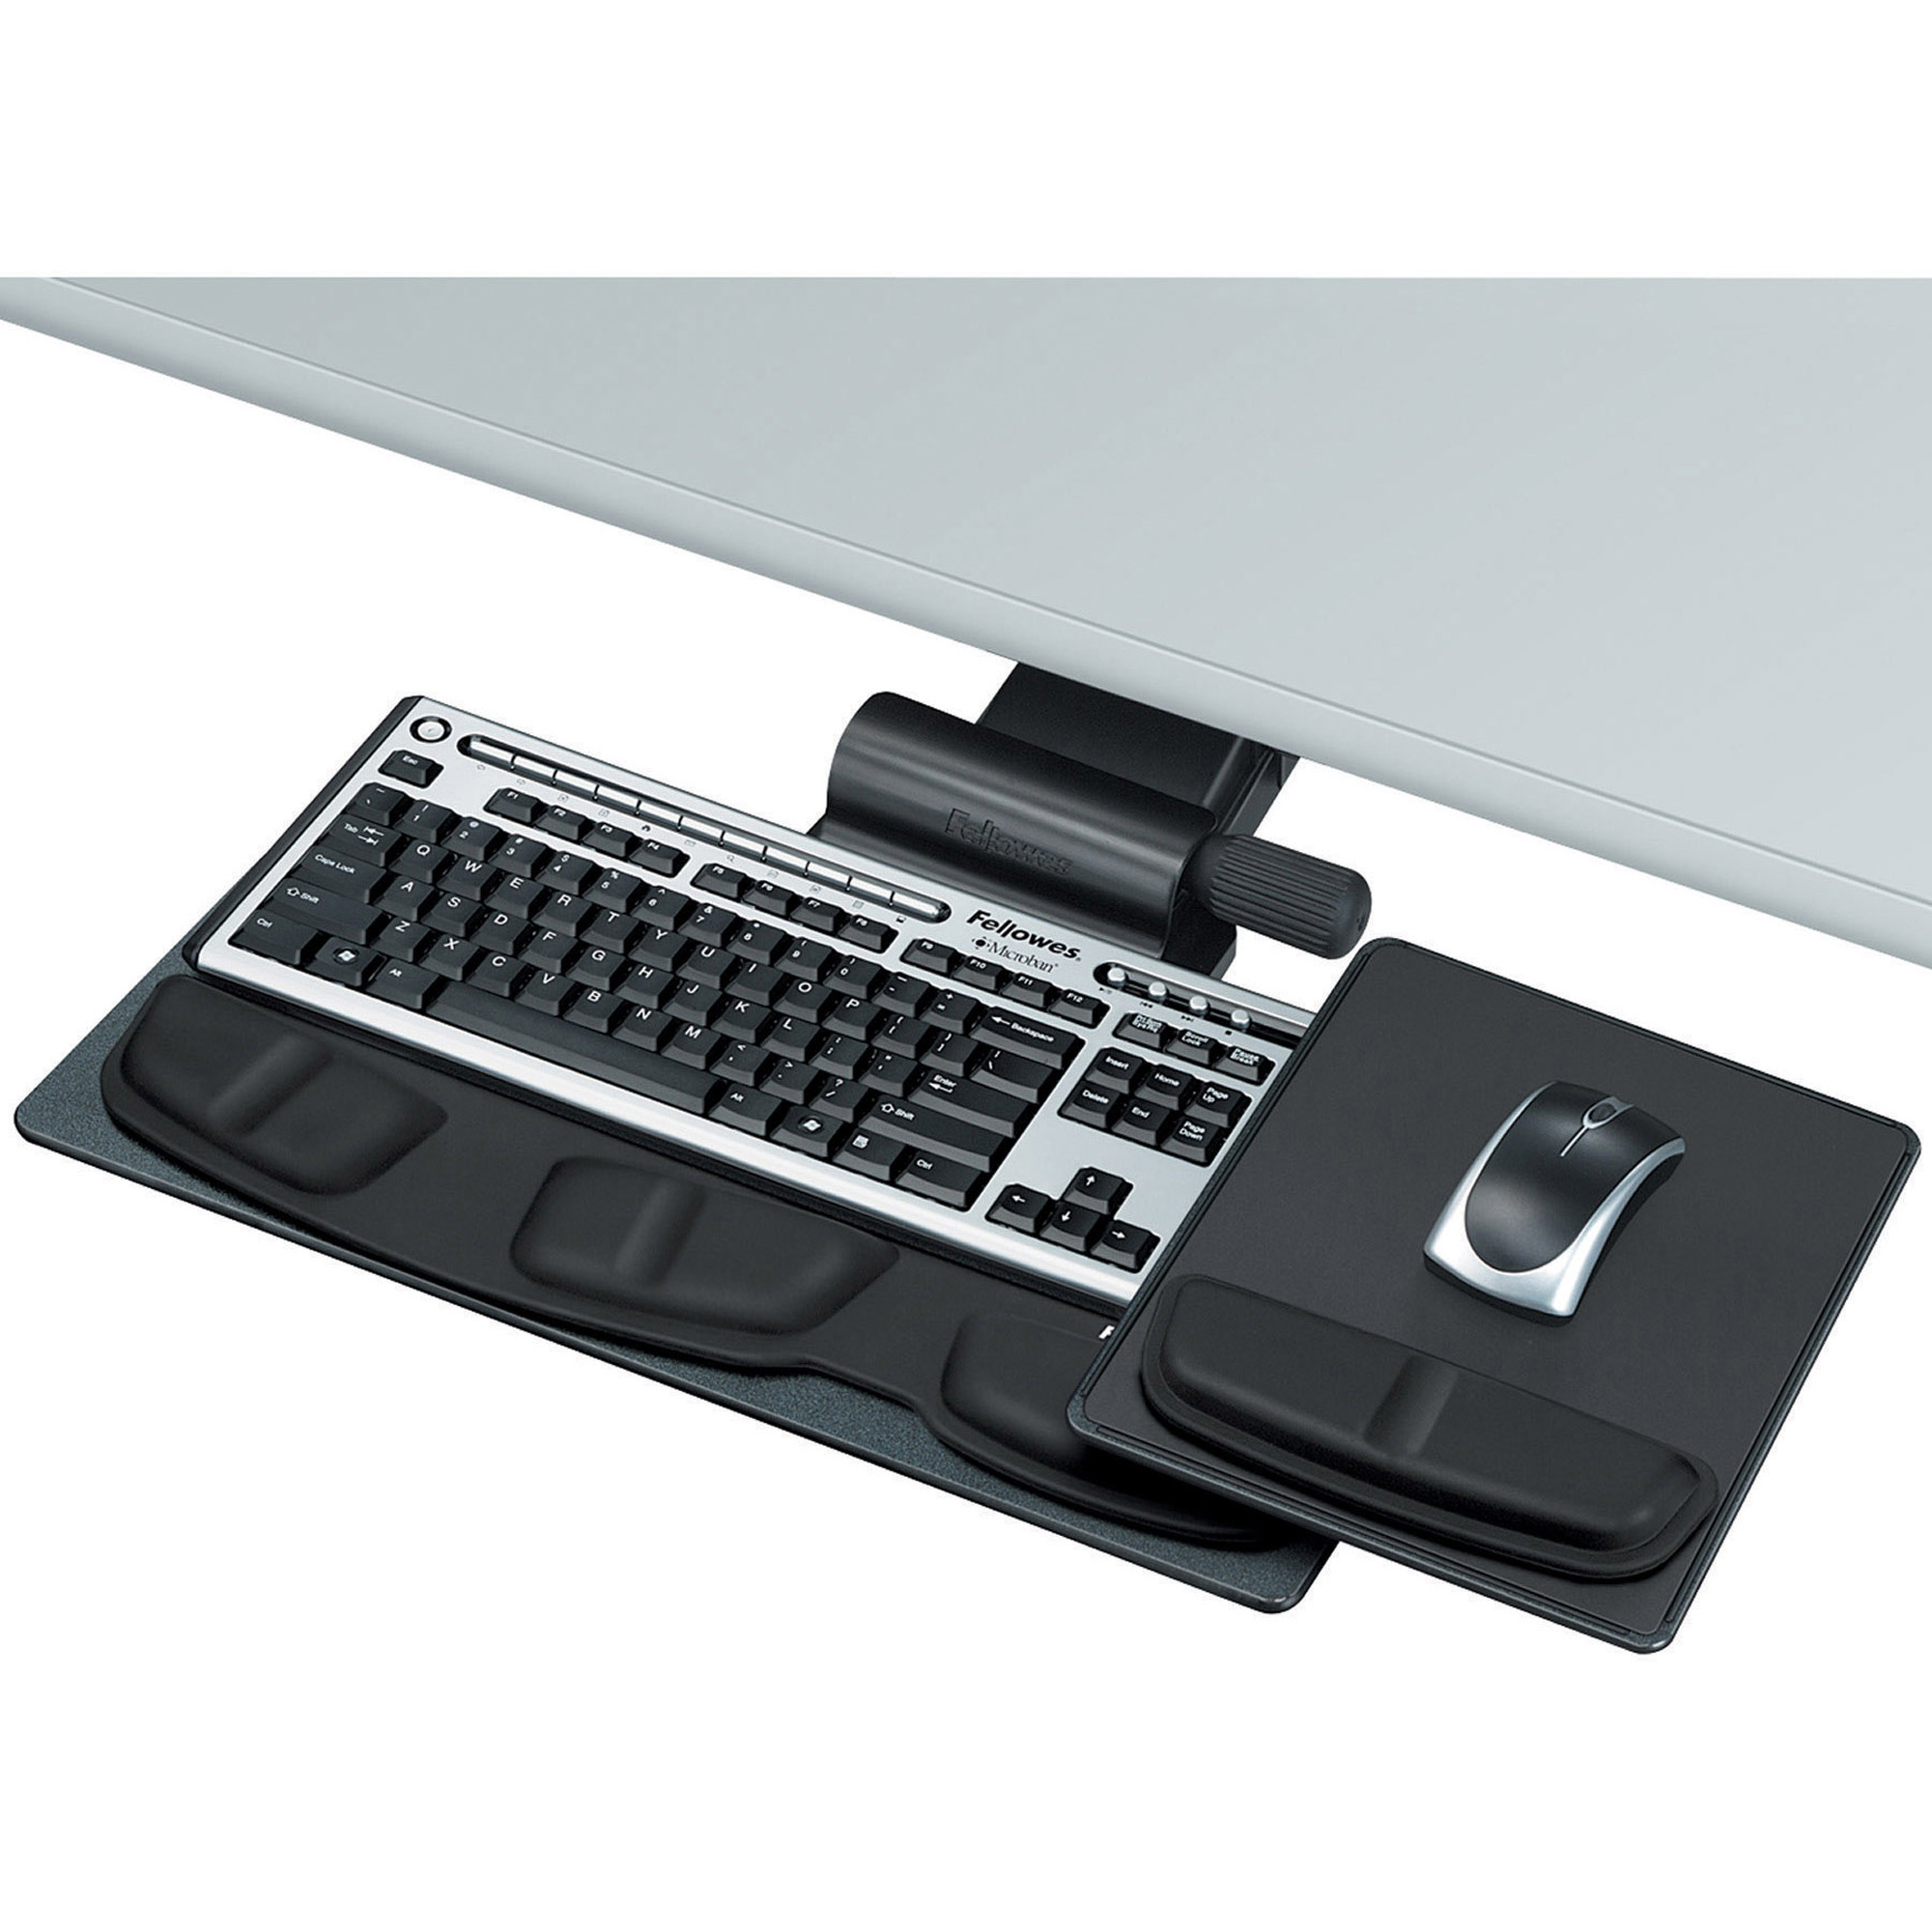 Fellowes Professional Series Premier Keyboard Tray, Black - image 2 of 3